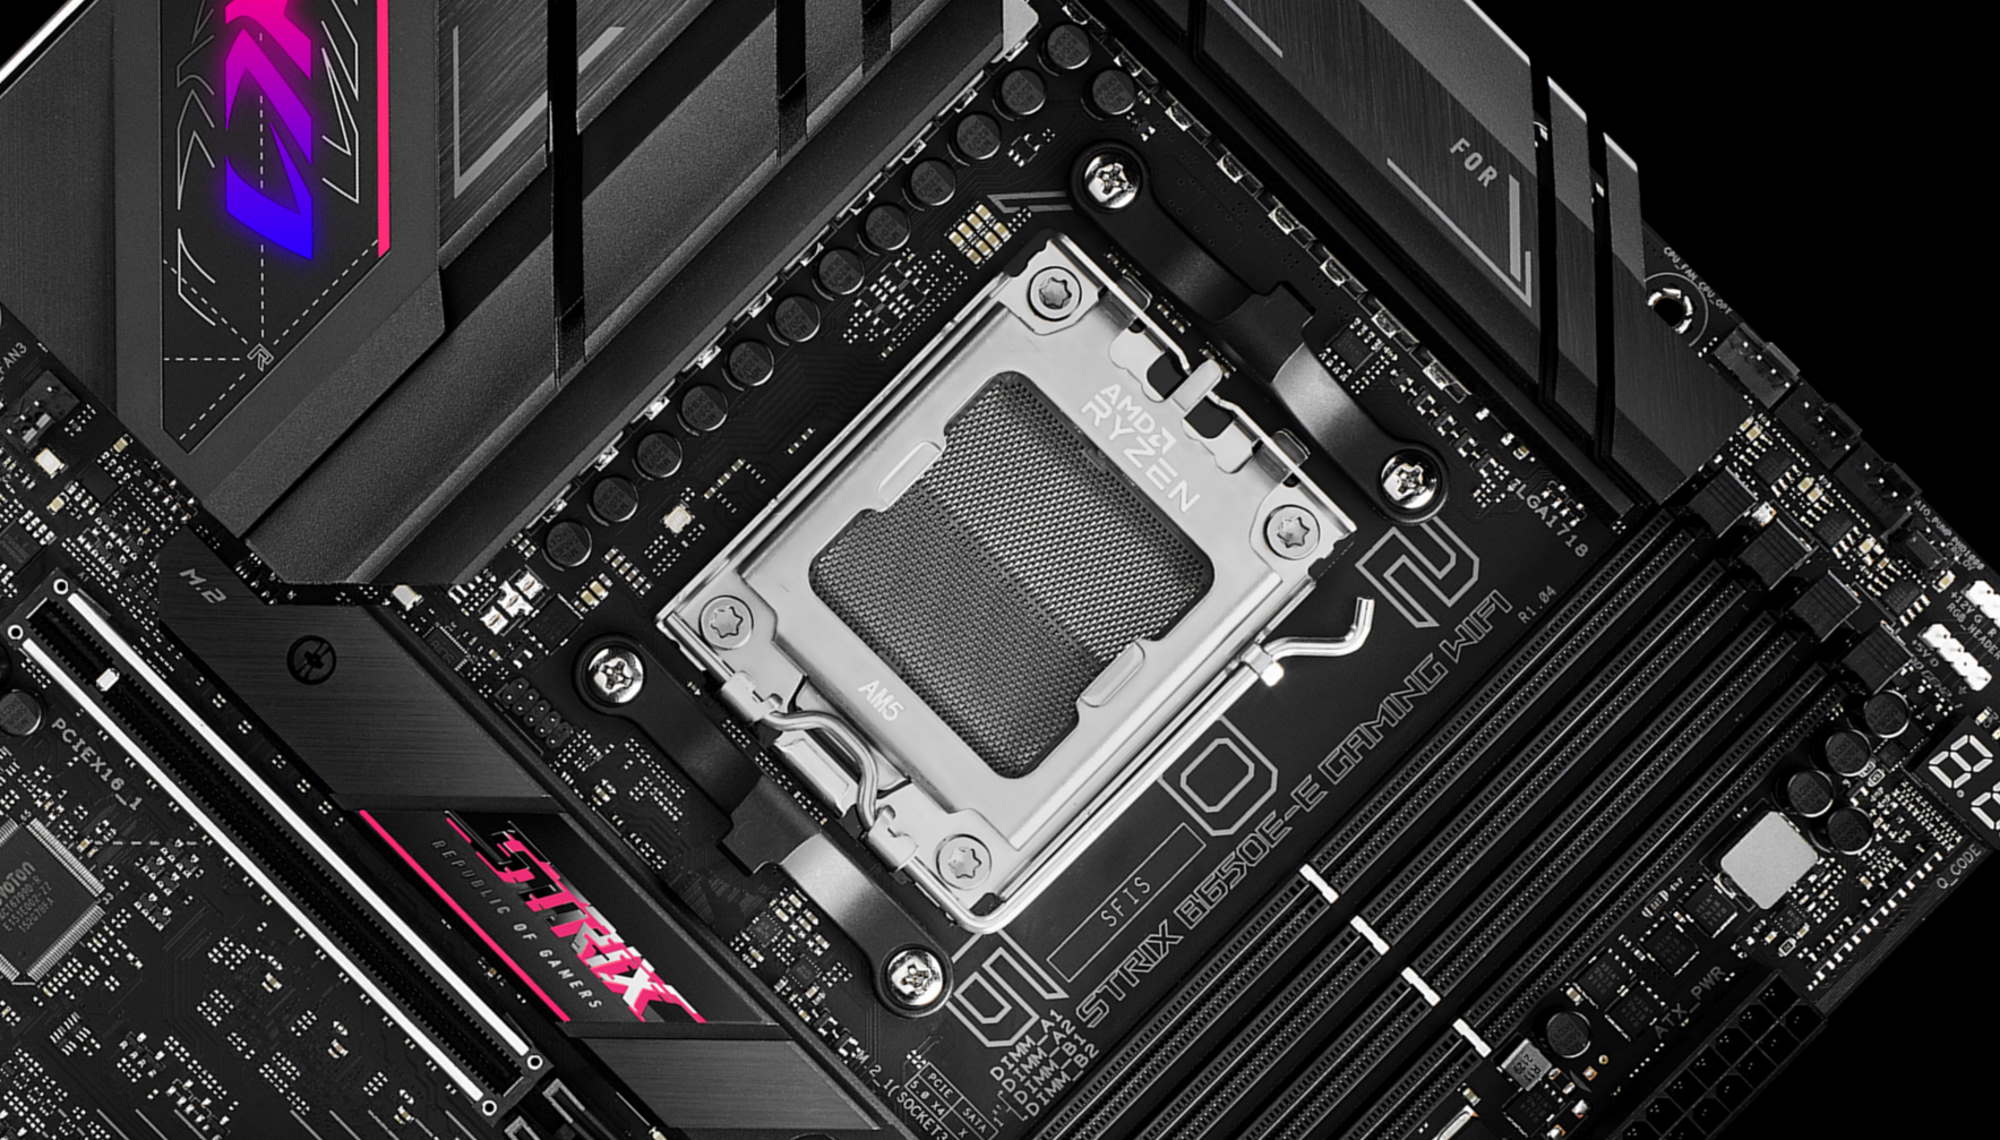 AMD B650 Extreme motherboards are made for budget overclocking